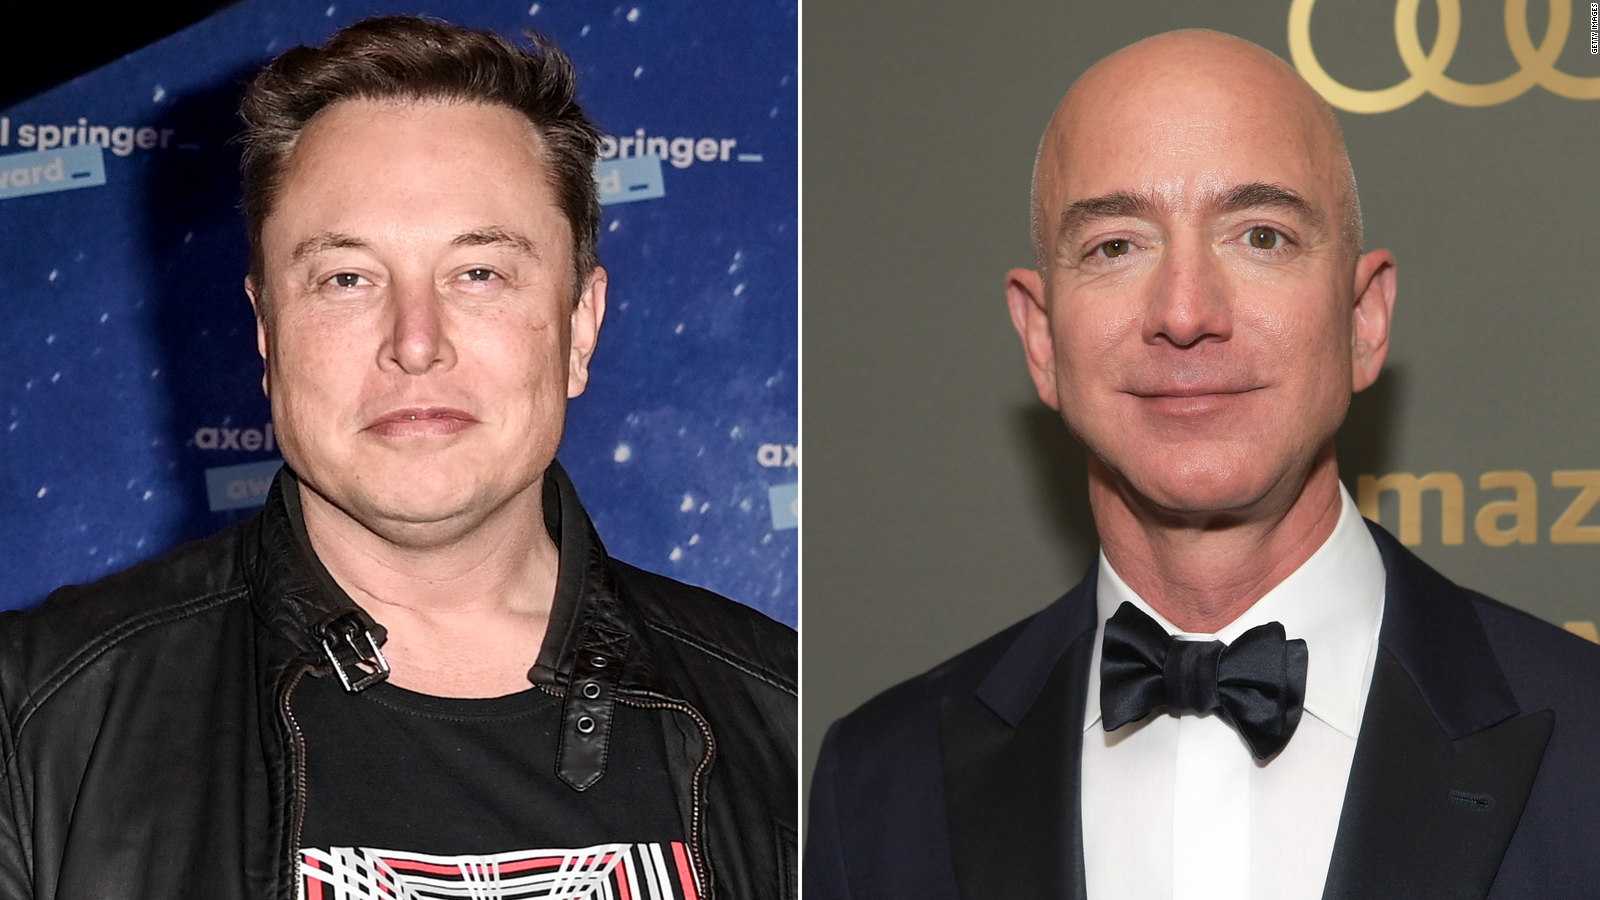 From US $ 26,000 million, Jeff Bezos has the Elon Musk as the richest man, according to Forbes |  Video